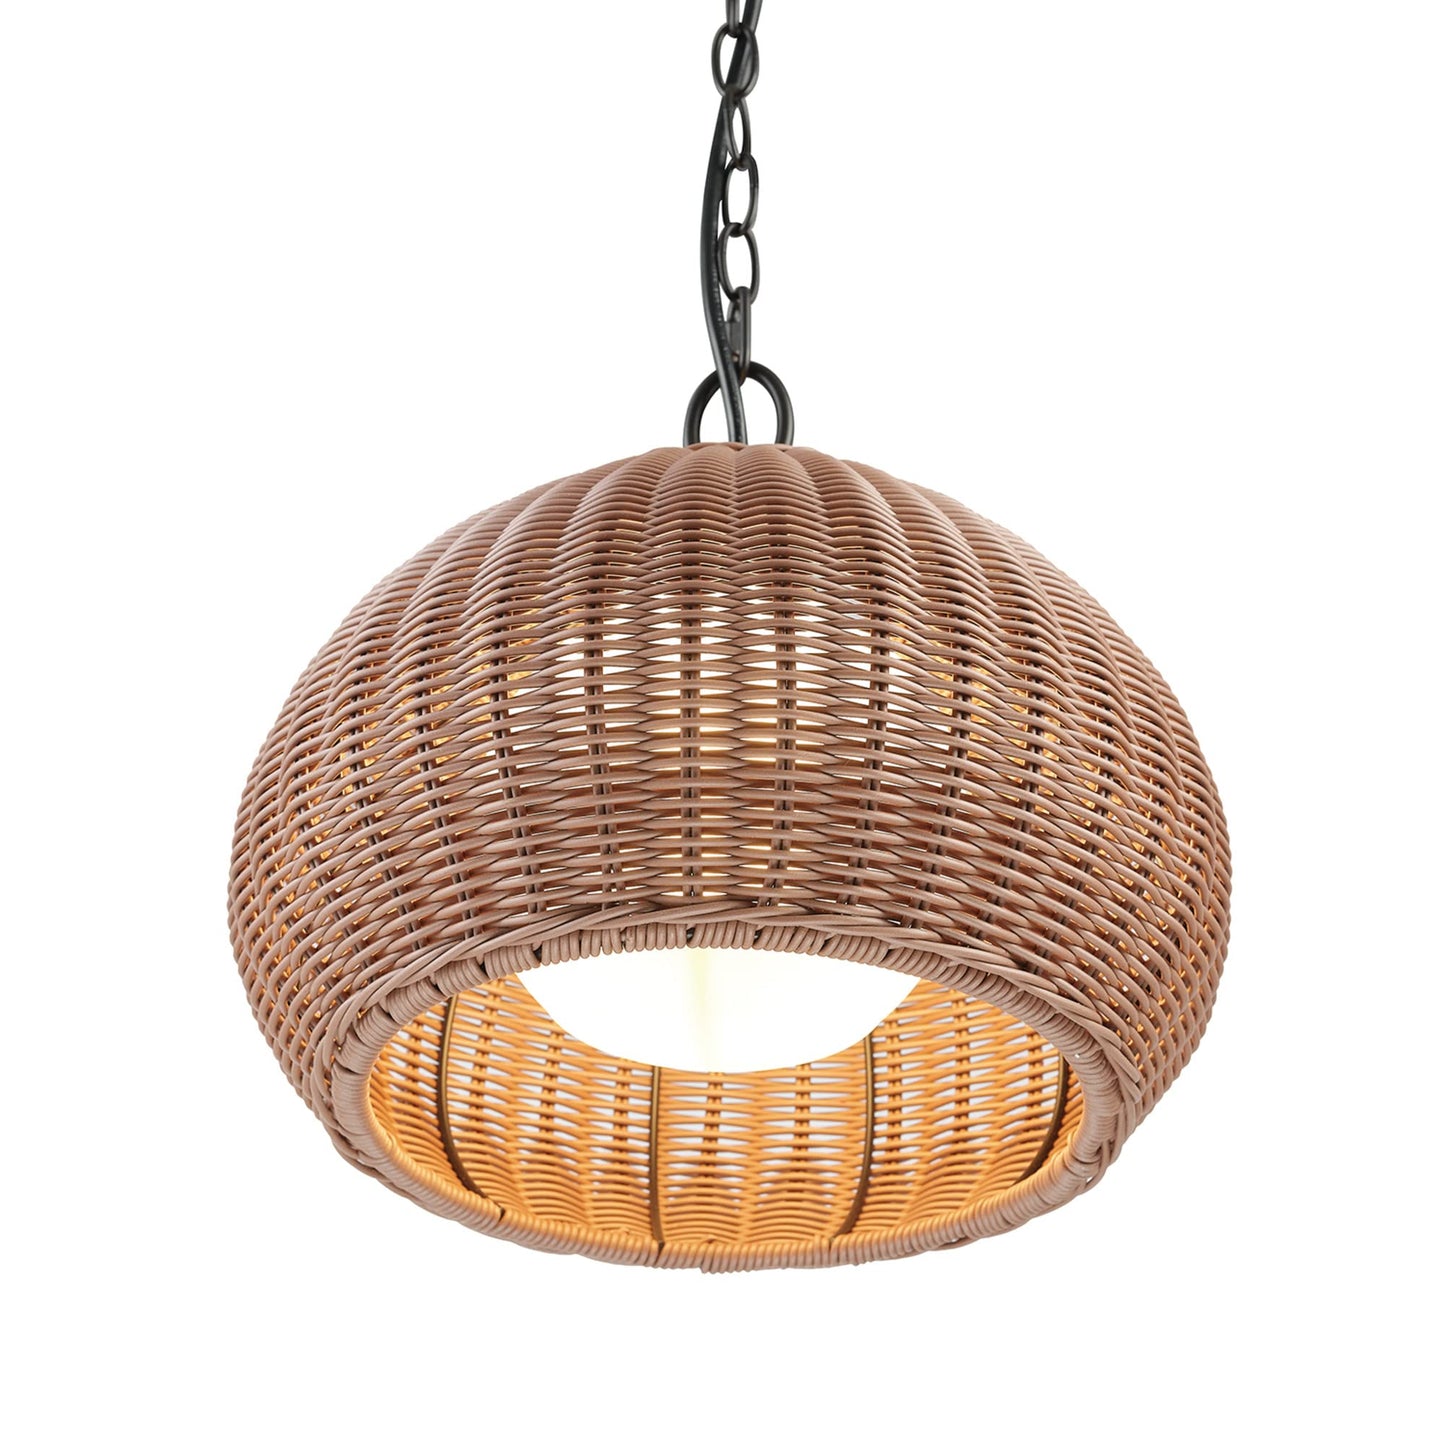 Globe 44761 1-Light Outdoor Plug-in Pendant Light, Plastic Rattan Shade, Frosted Inner Shade, Bronze Hanging Cord and Chain, Kitchen Island, Cafe, Ceiling Hanging Light, Bulb Not Included